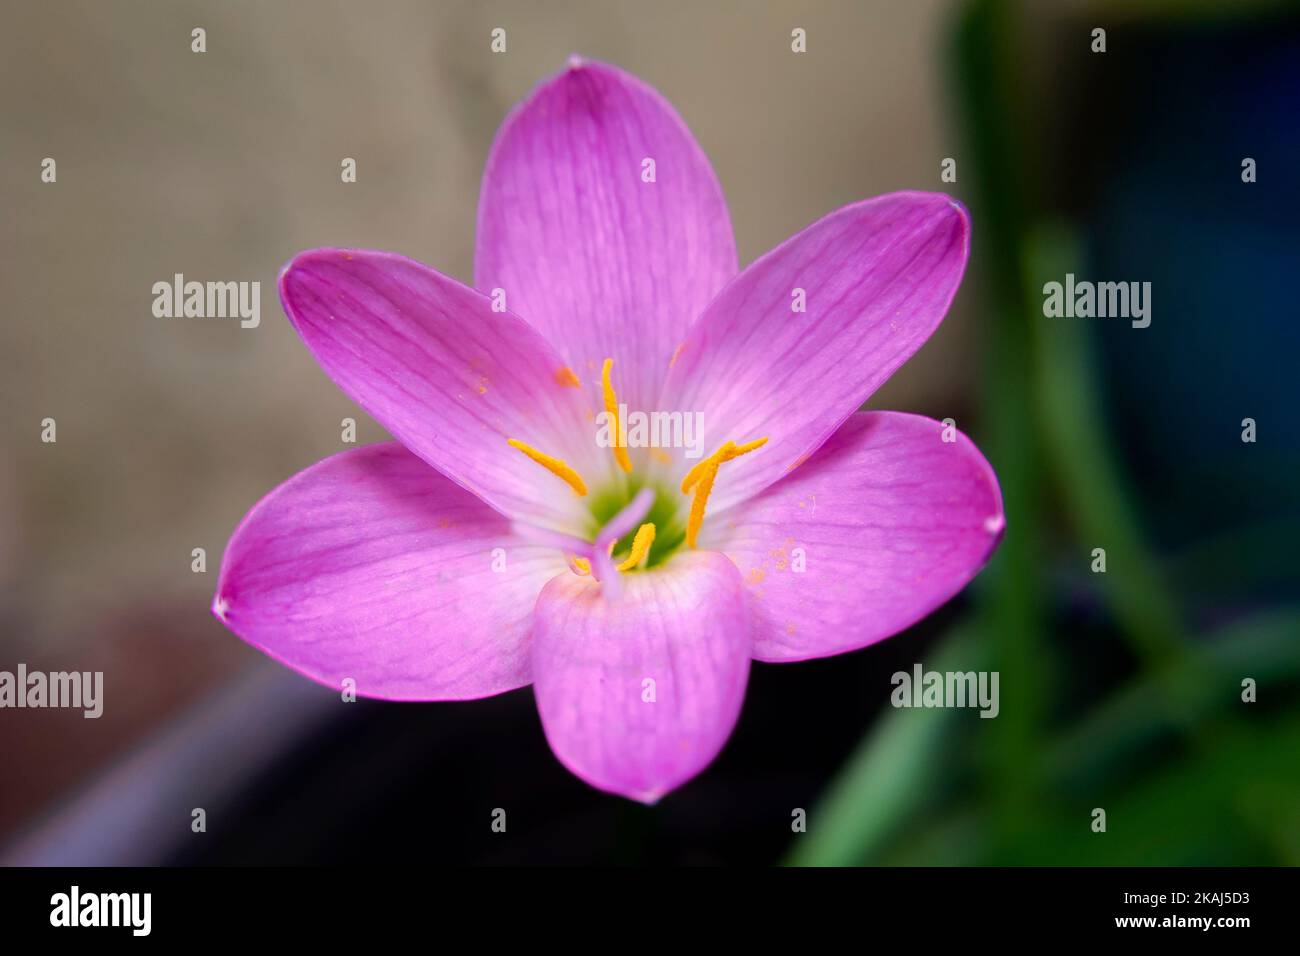 A closeup of a Zephyranthes minuta plant's flower against a blurred background Stock Photo